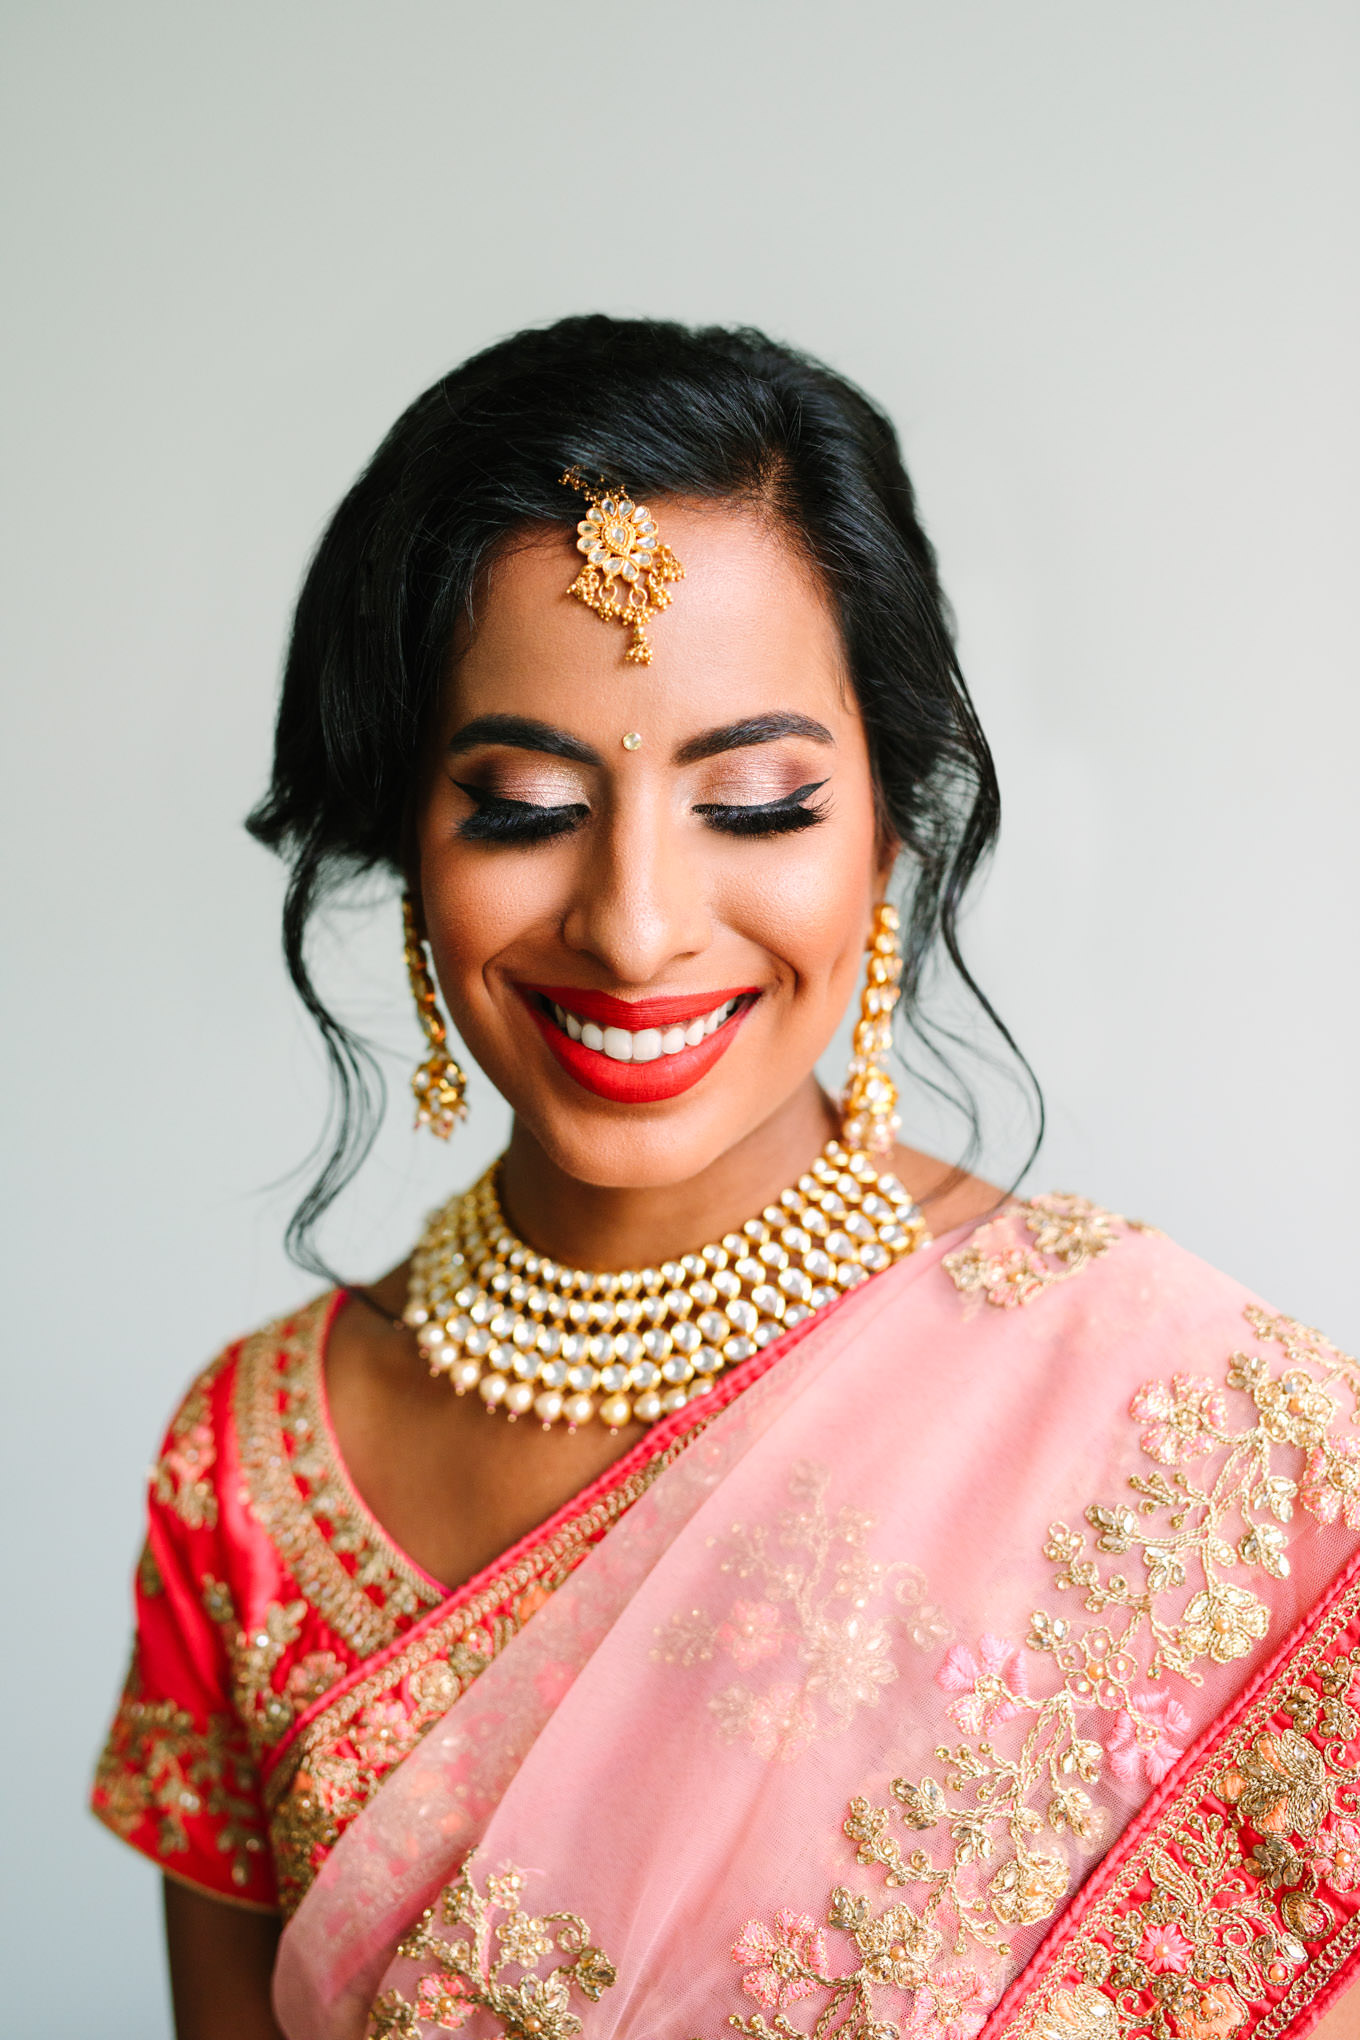 Smiling bride in bright red lipstick. Two Disney artists create a unique and colorful Indian Fusion wedding at The Fig House Los Angeles, featured on Green Wedding Shoes. | Colorful and elevated wedding inspiration for fun-loving couples in Southern California | #indianwedding #indianfusionwedding #thefighouse #losangeleswedding   Source: Mary Costa Photography | Los Angeles